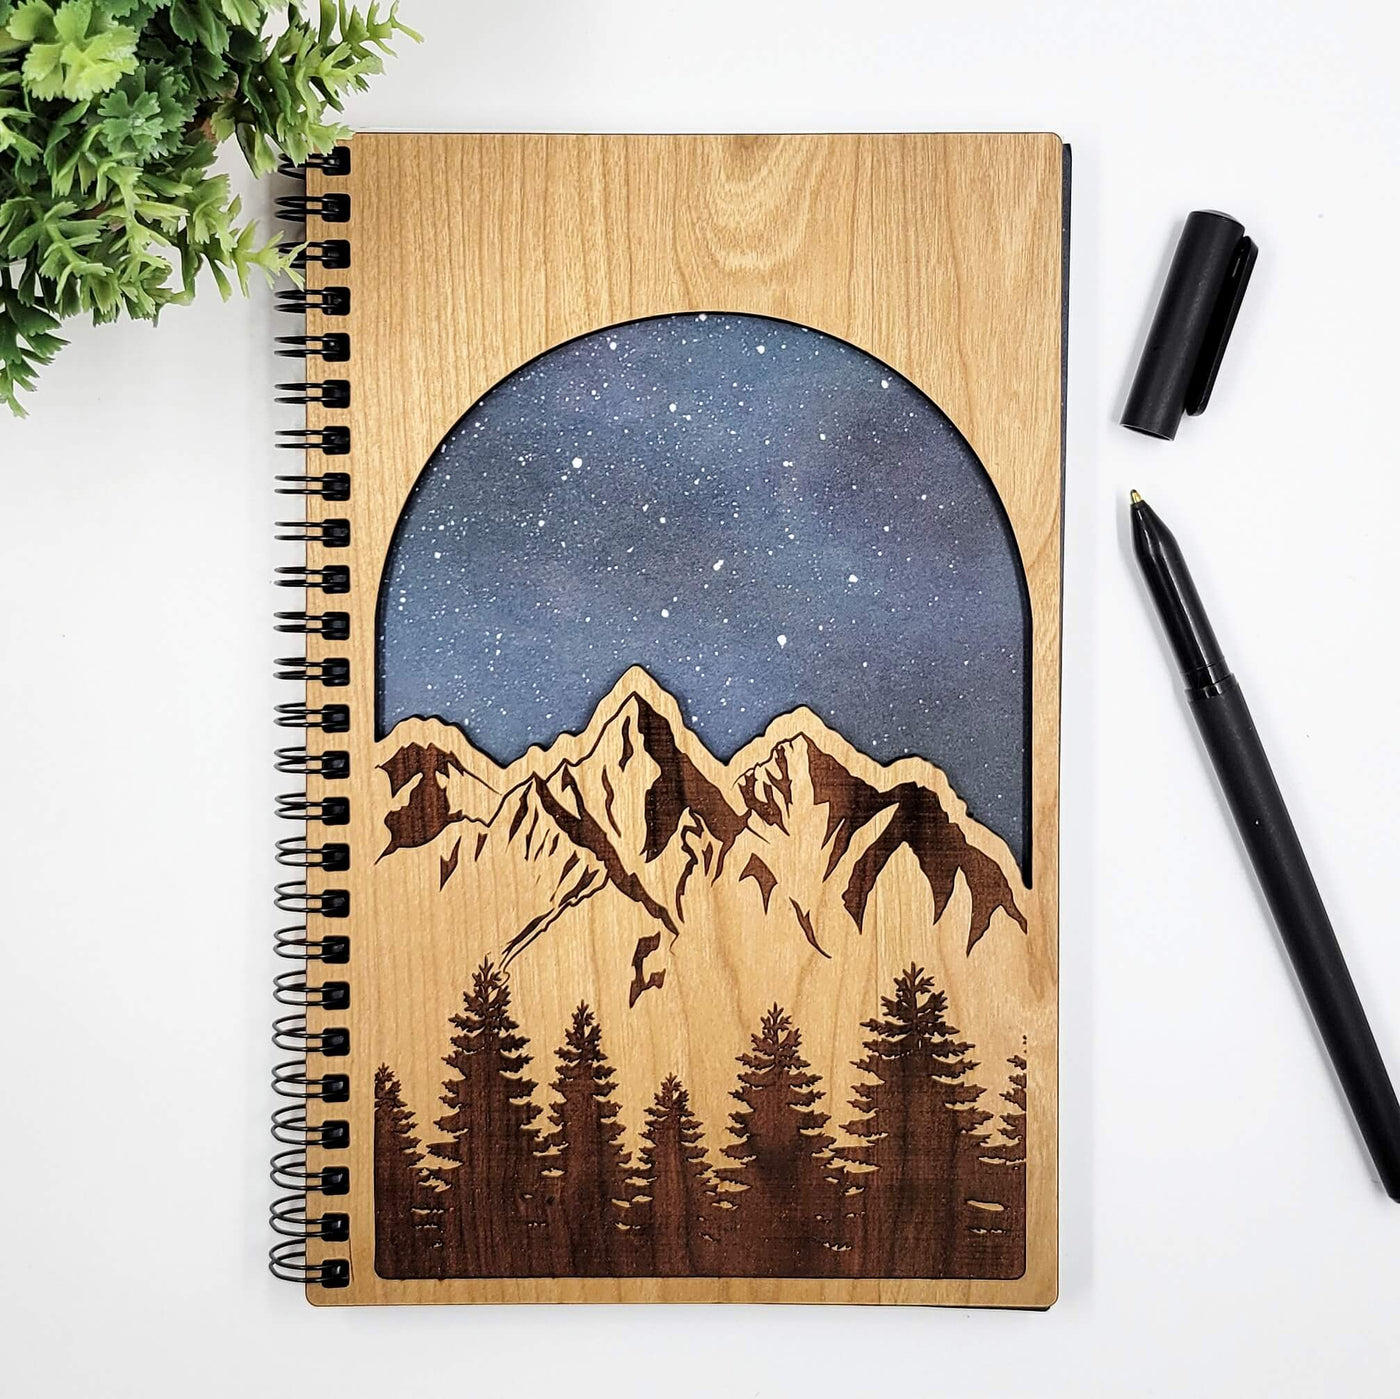 Starry mountains wood journal - blank, lined travel notebook